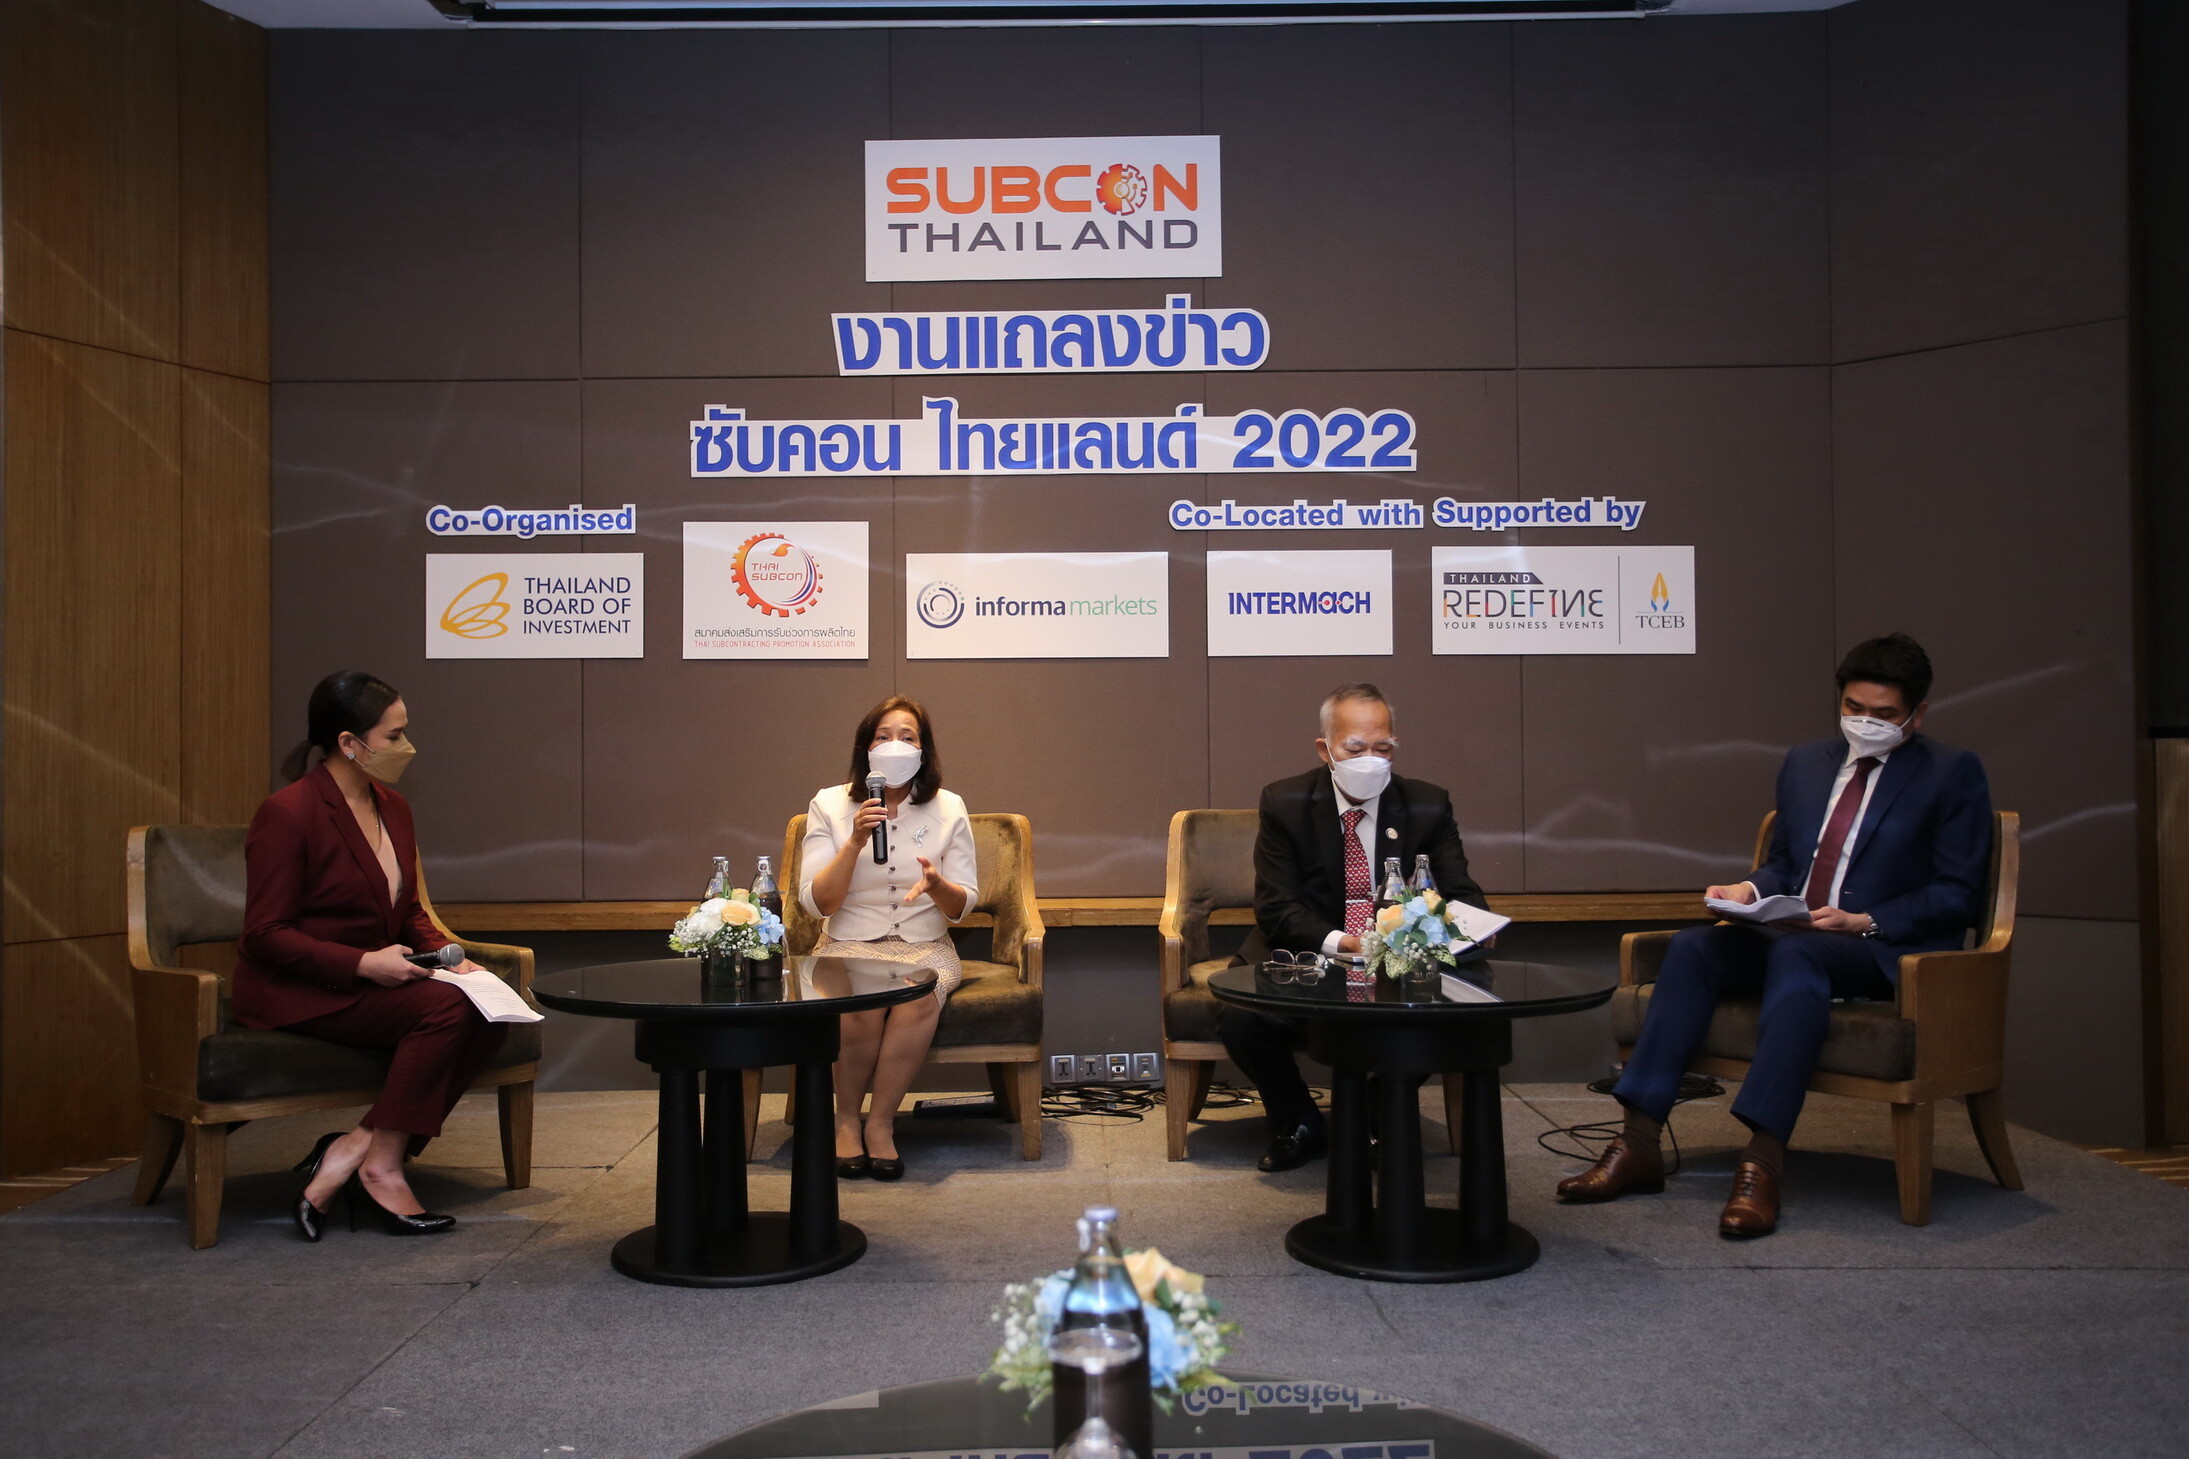 SUBCON Thailand 2022, the best regional business matching event, is ready to organize on May 18-21 at BITEC, Bangna